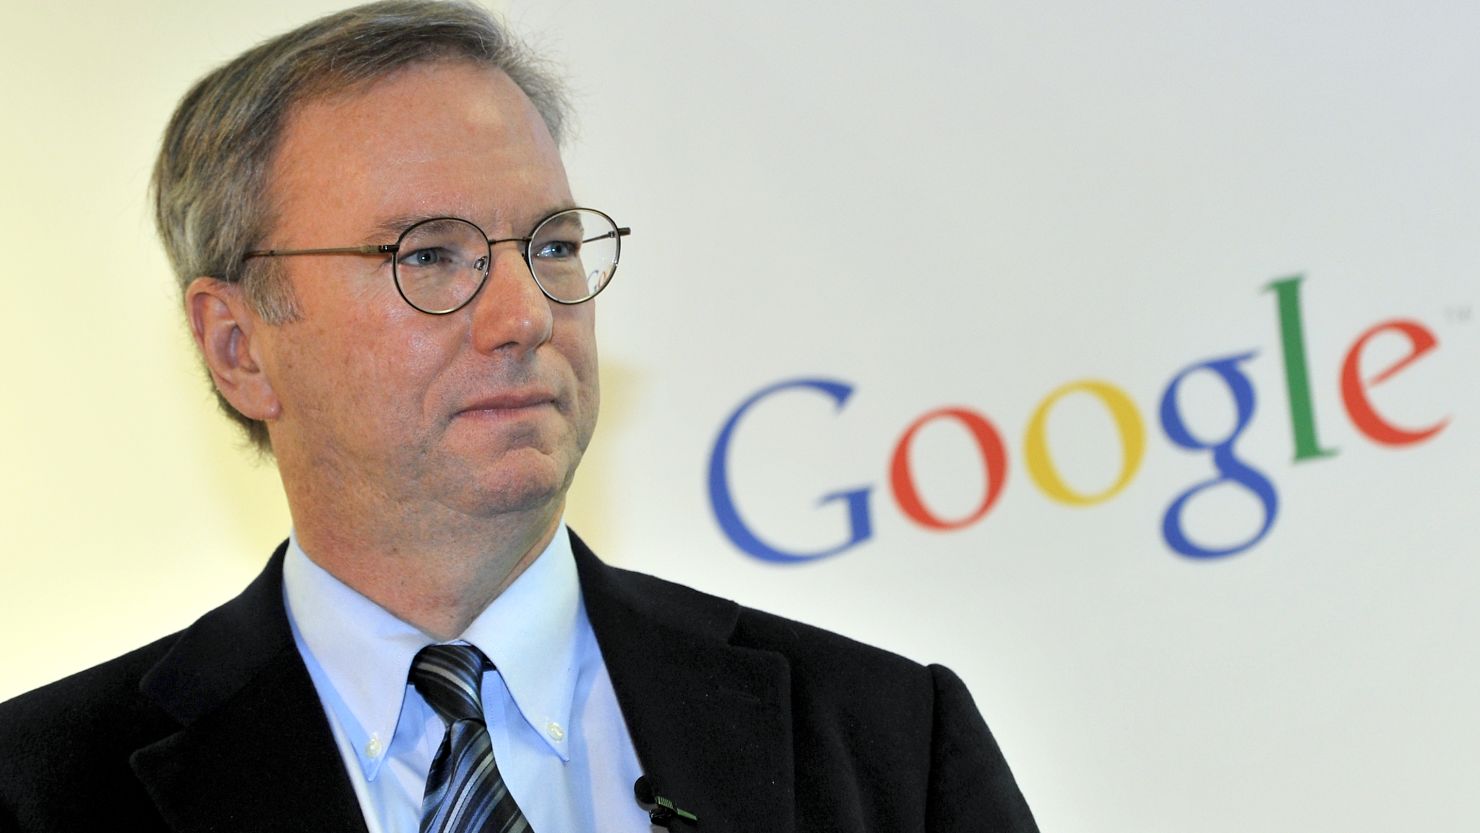 Google chairman Eric Schmidt says Android is dominating Apple's mobile system like Microsoft once dominated the company on PCs.